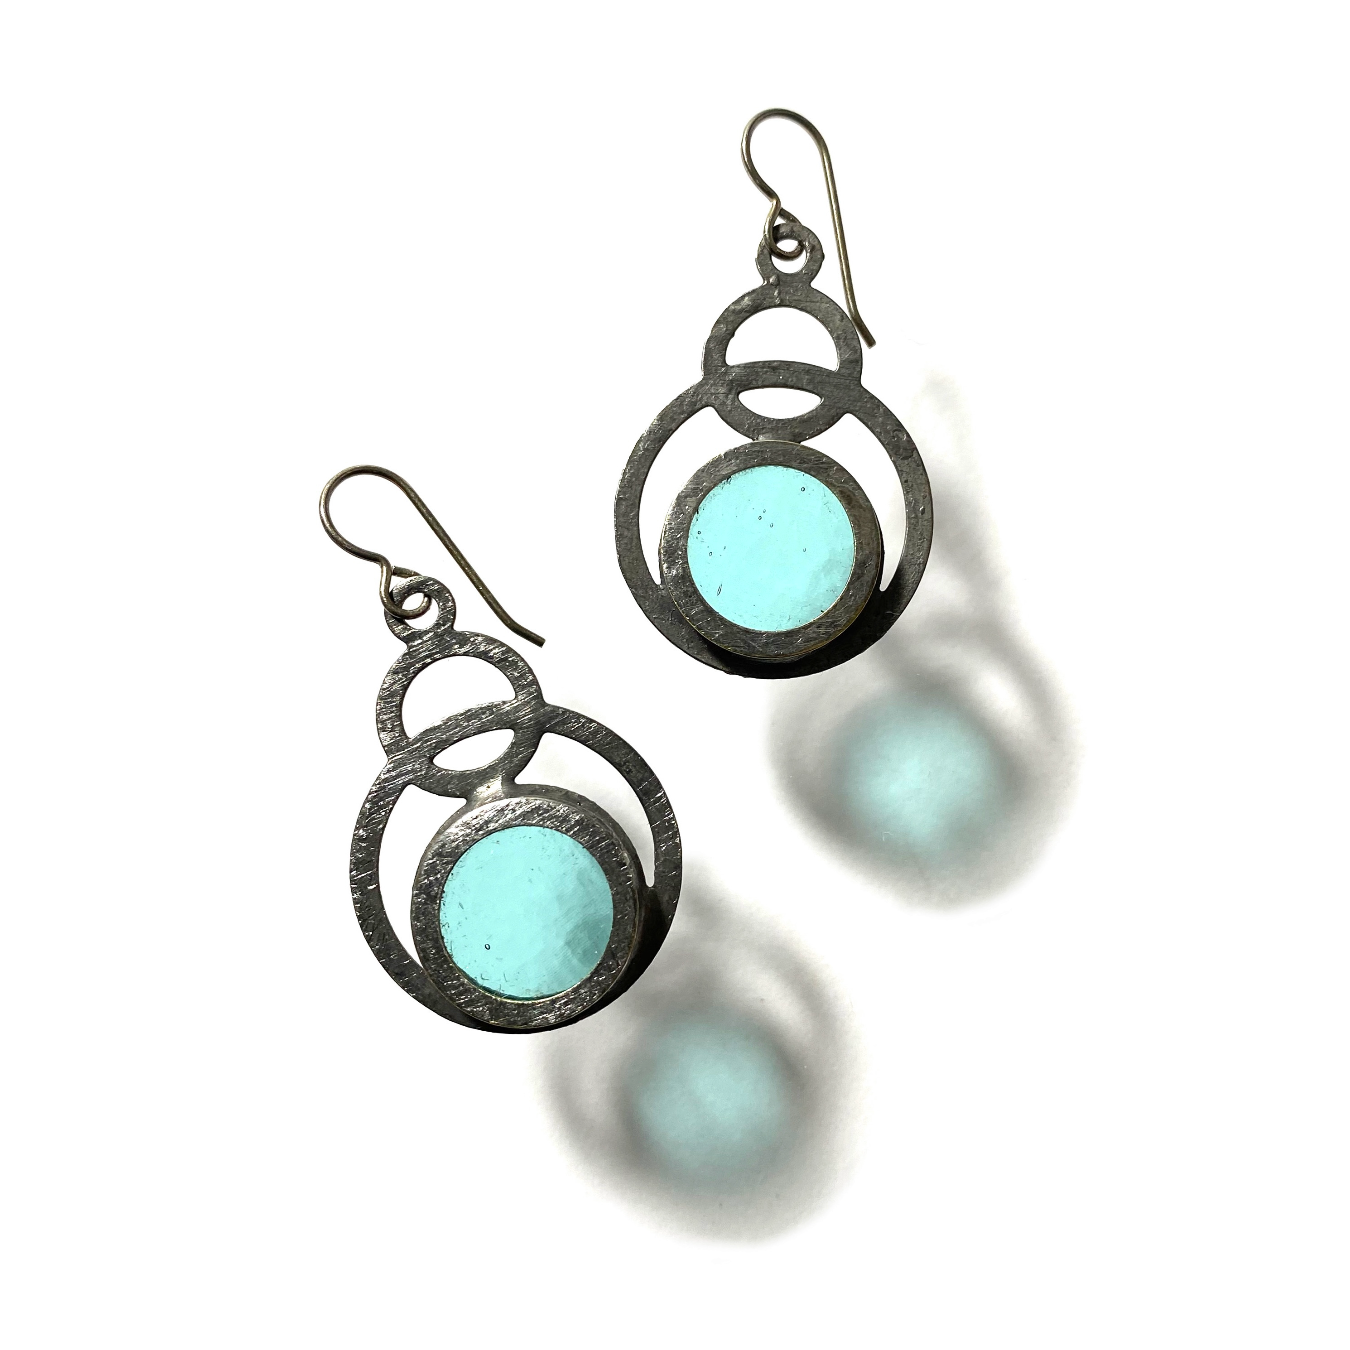 Eclipse Stained Glass Earrings - Aqua